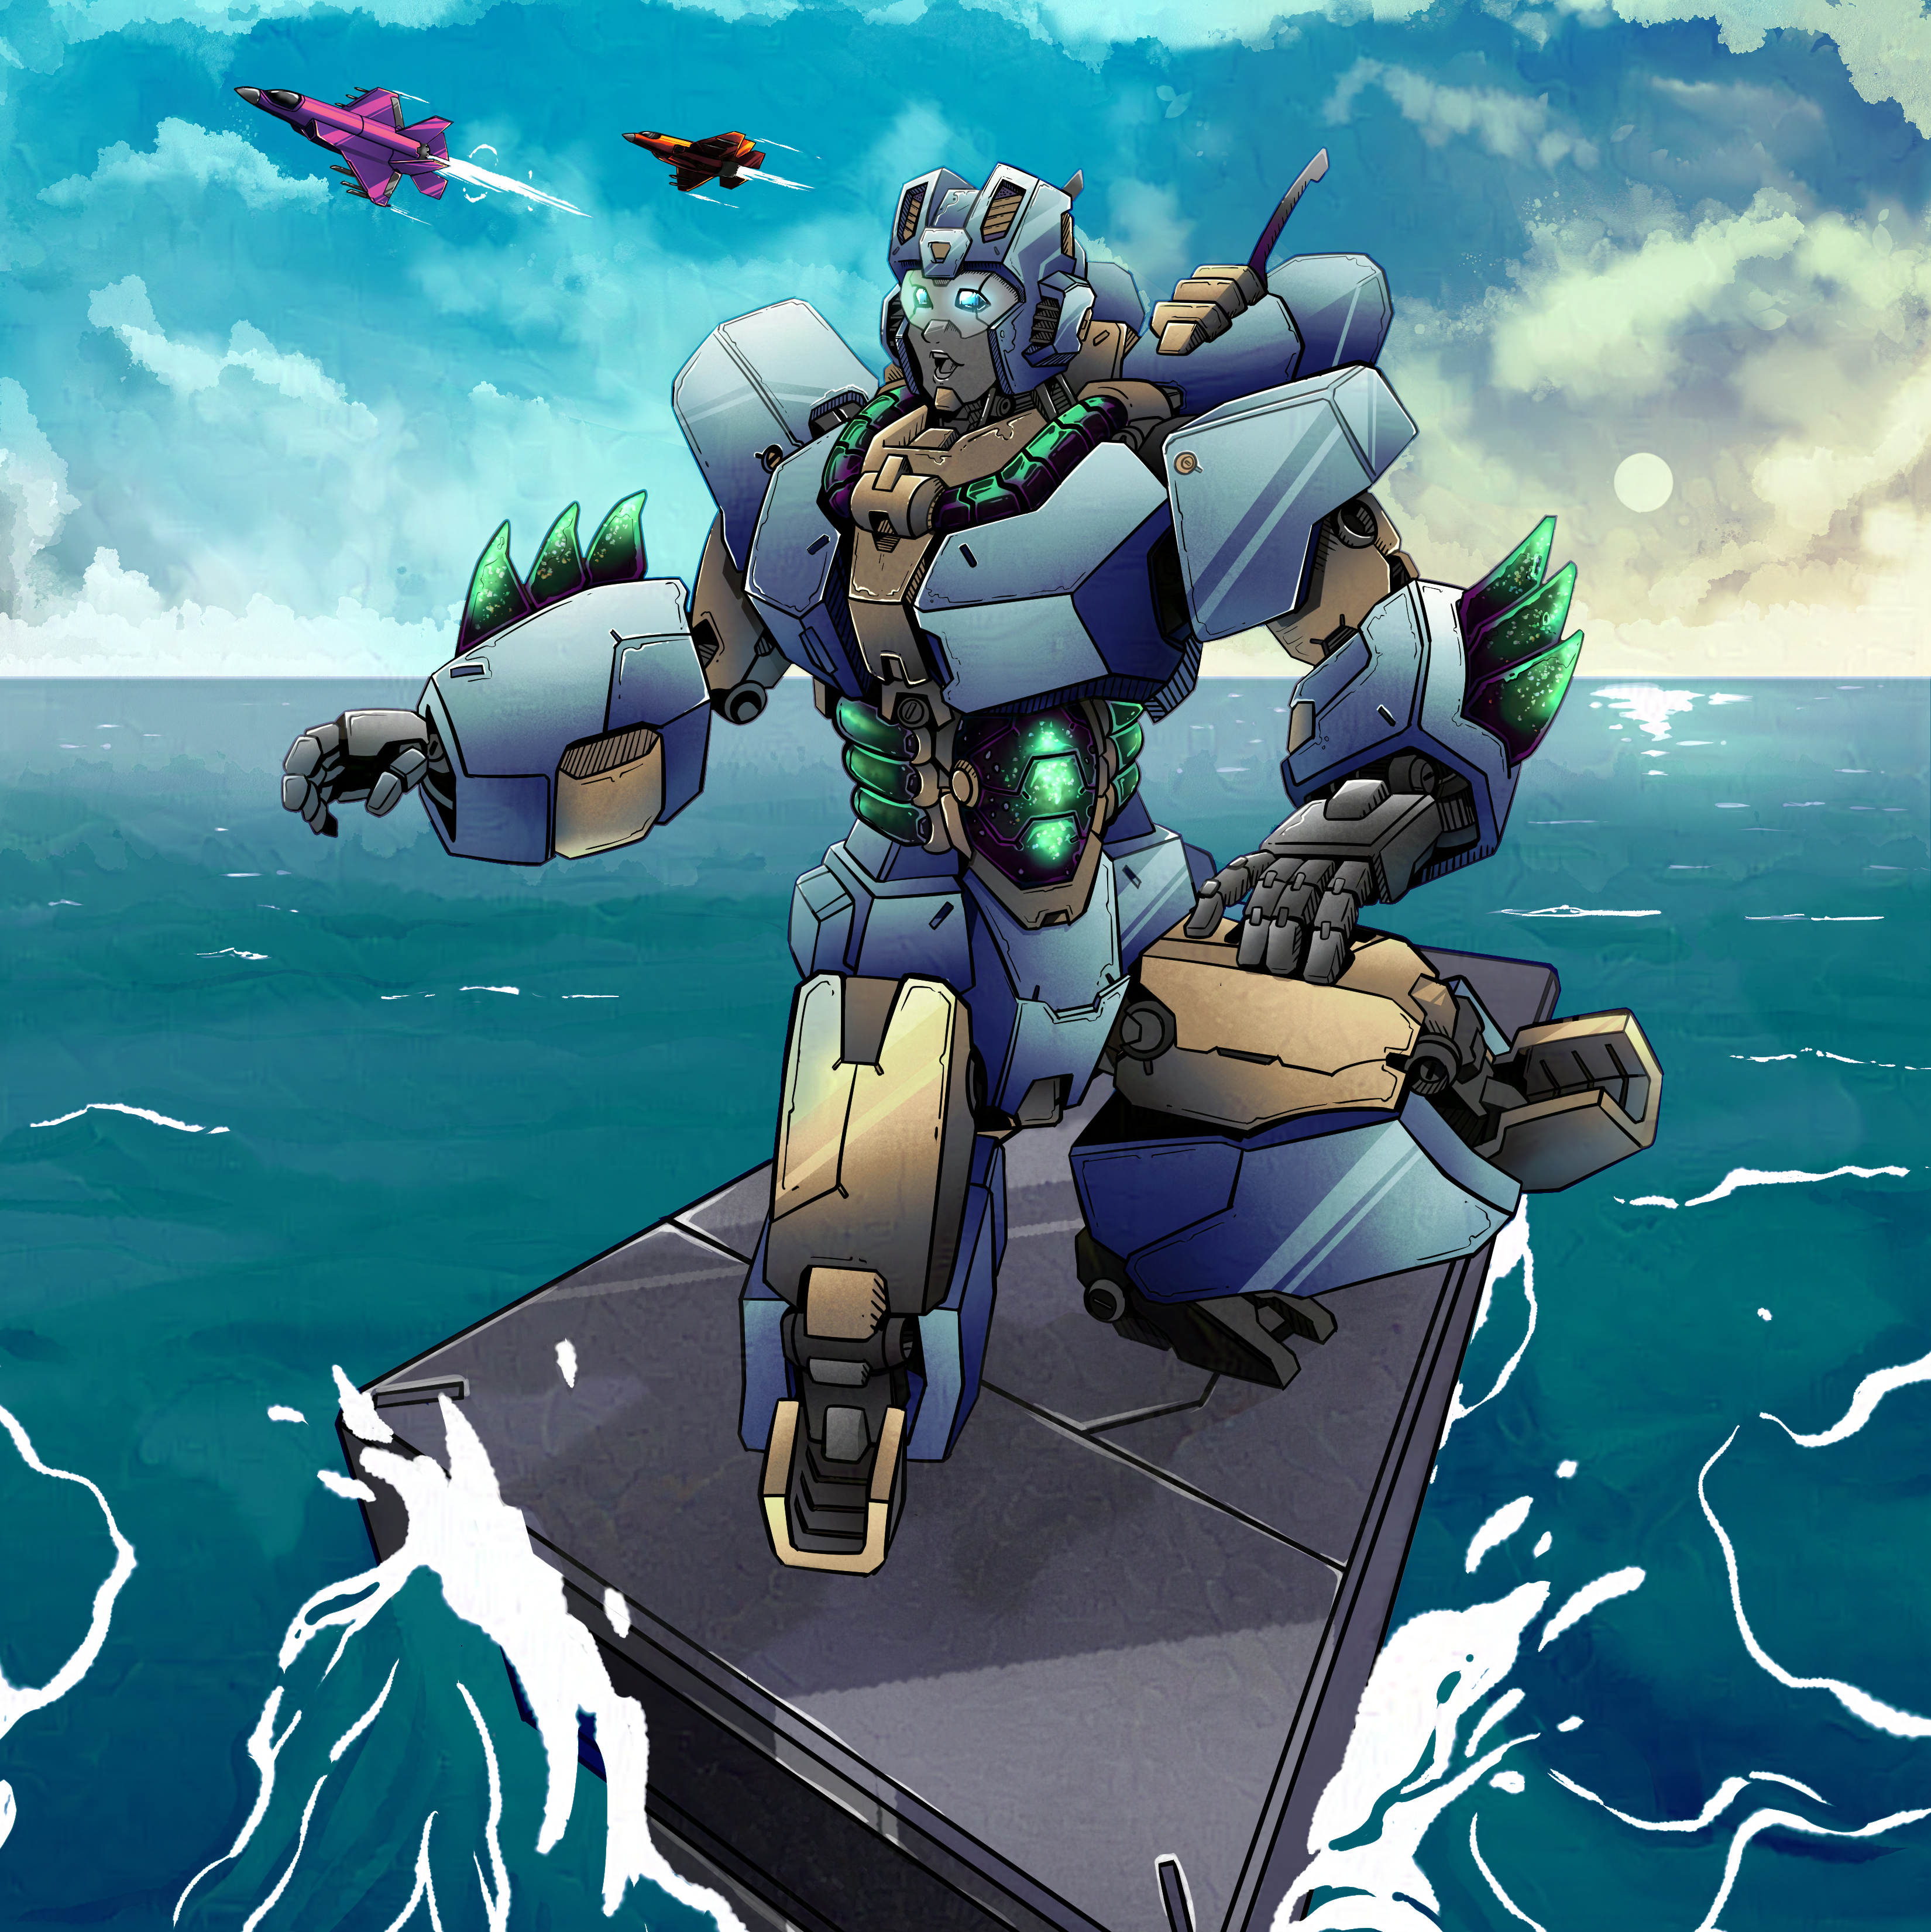 Full Colour Illustration of a robot standing on a crate in the ocean, two jetfighters flying in the sky behind it.